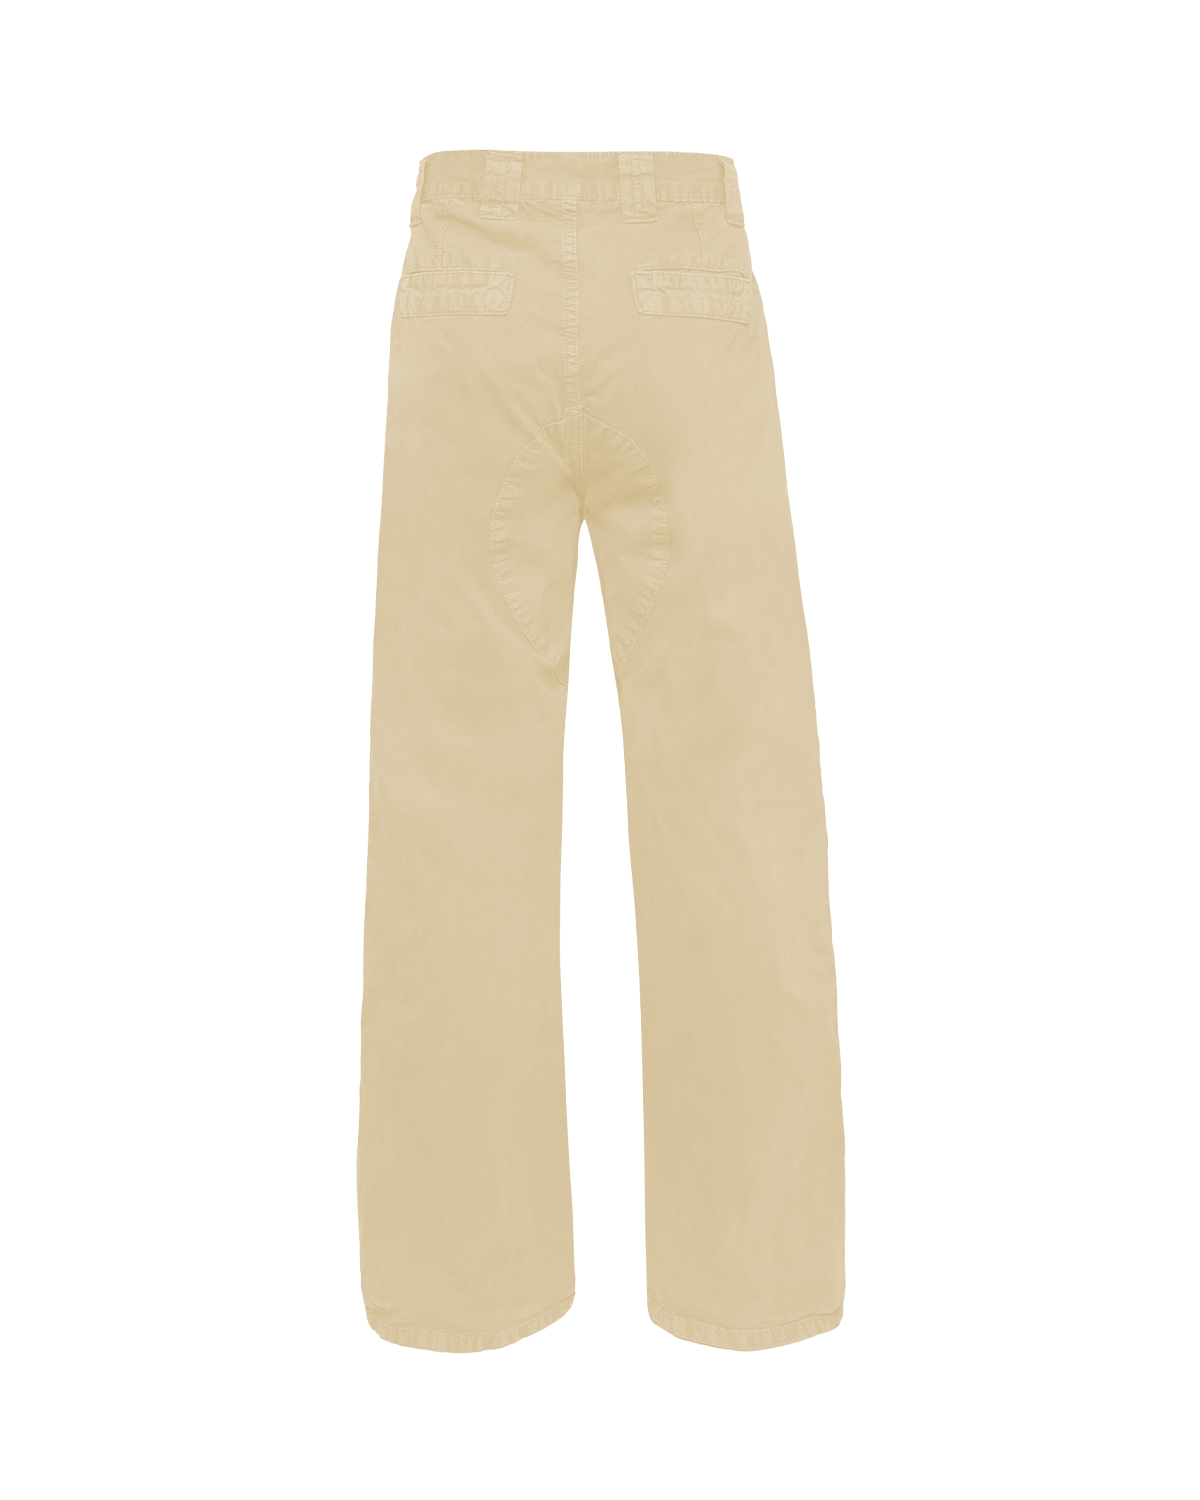 RODES DOUBLE-ZIP YELLOW TROUSERS